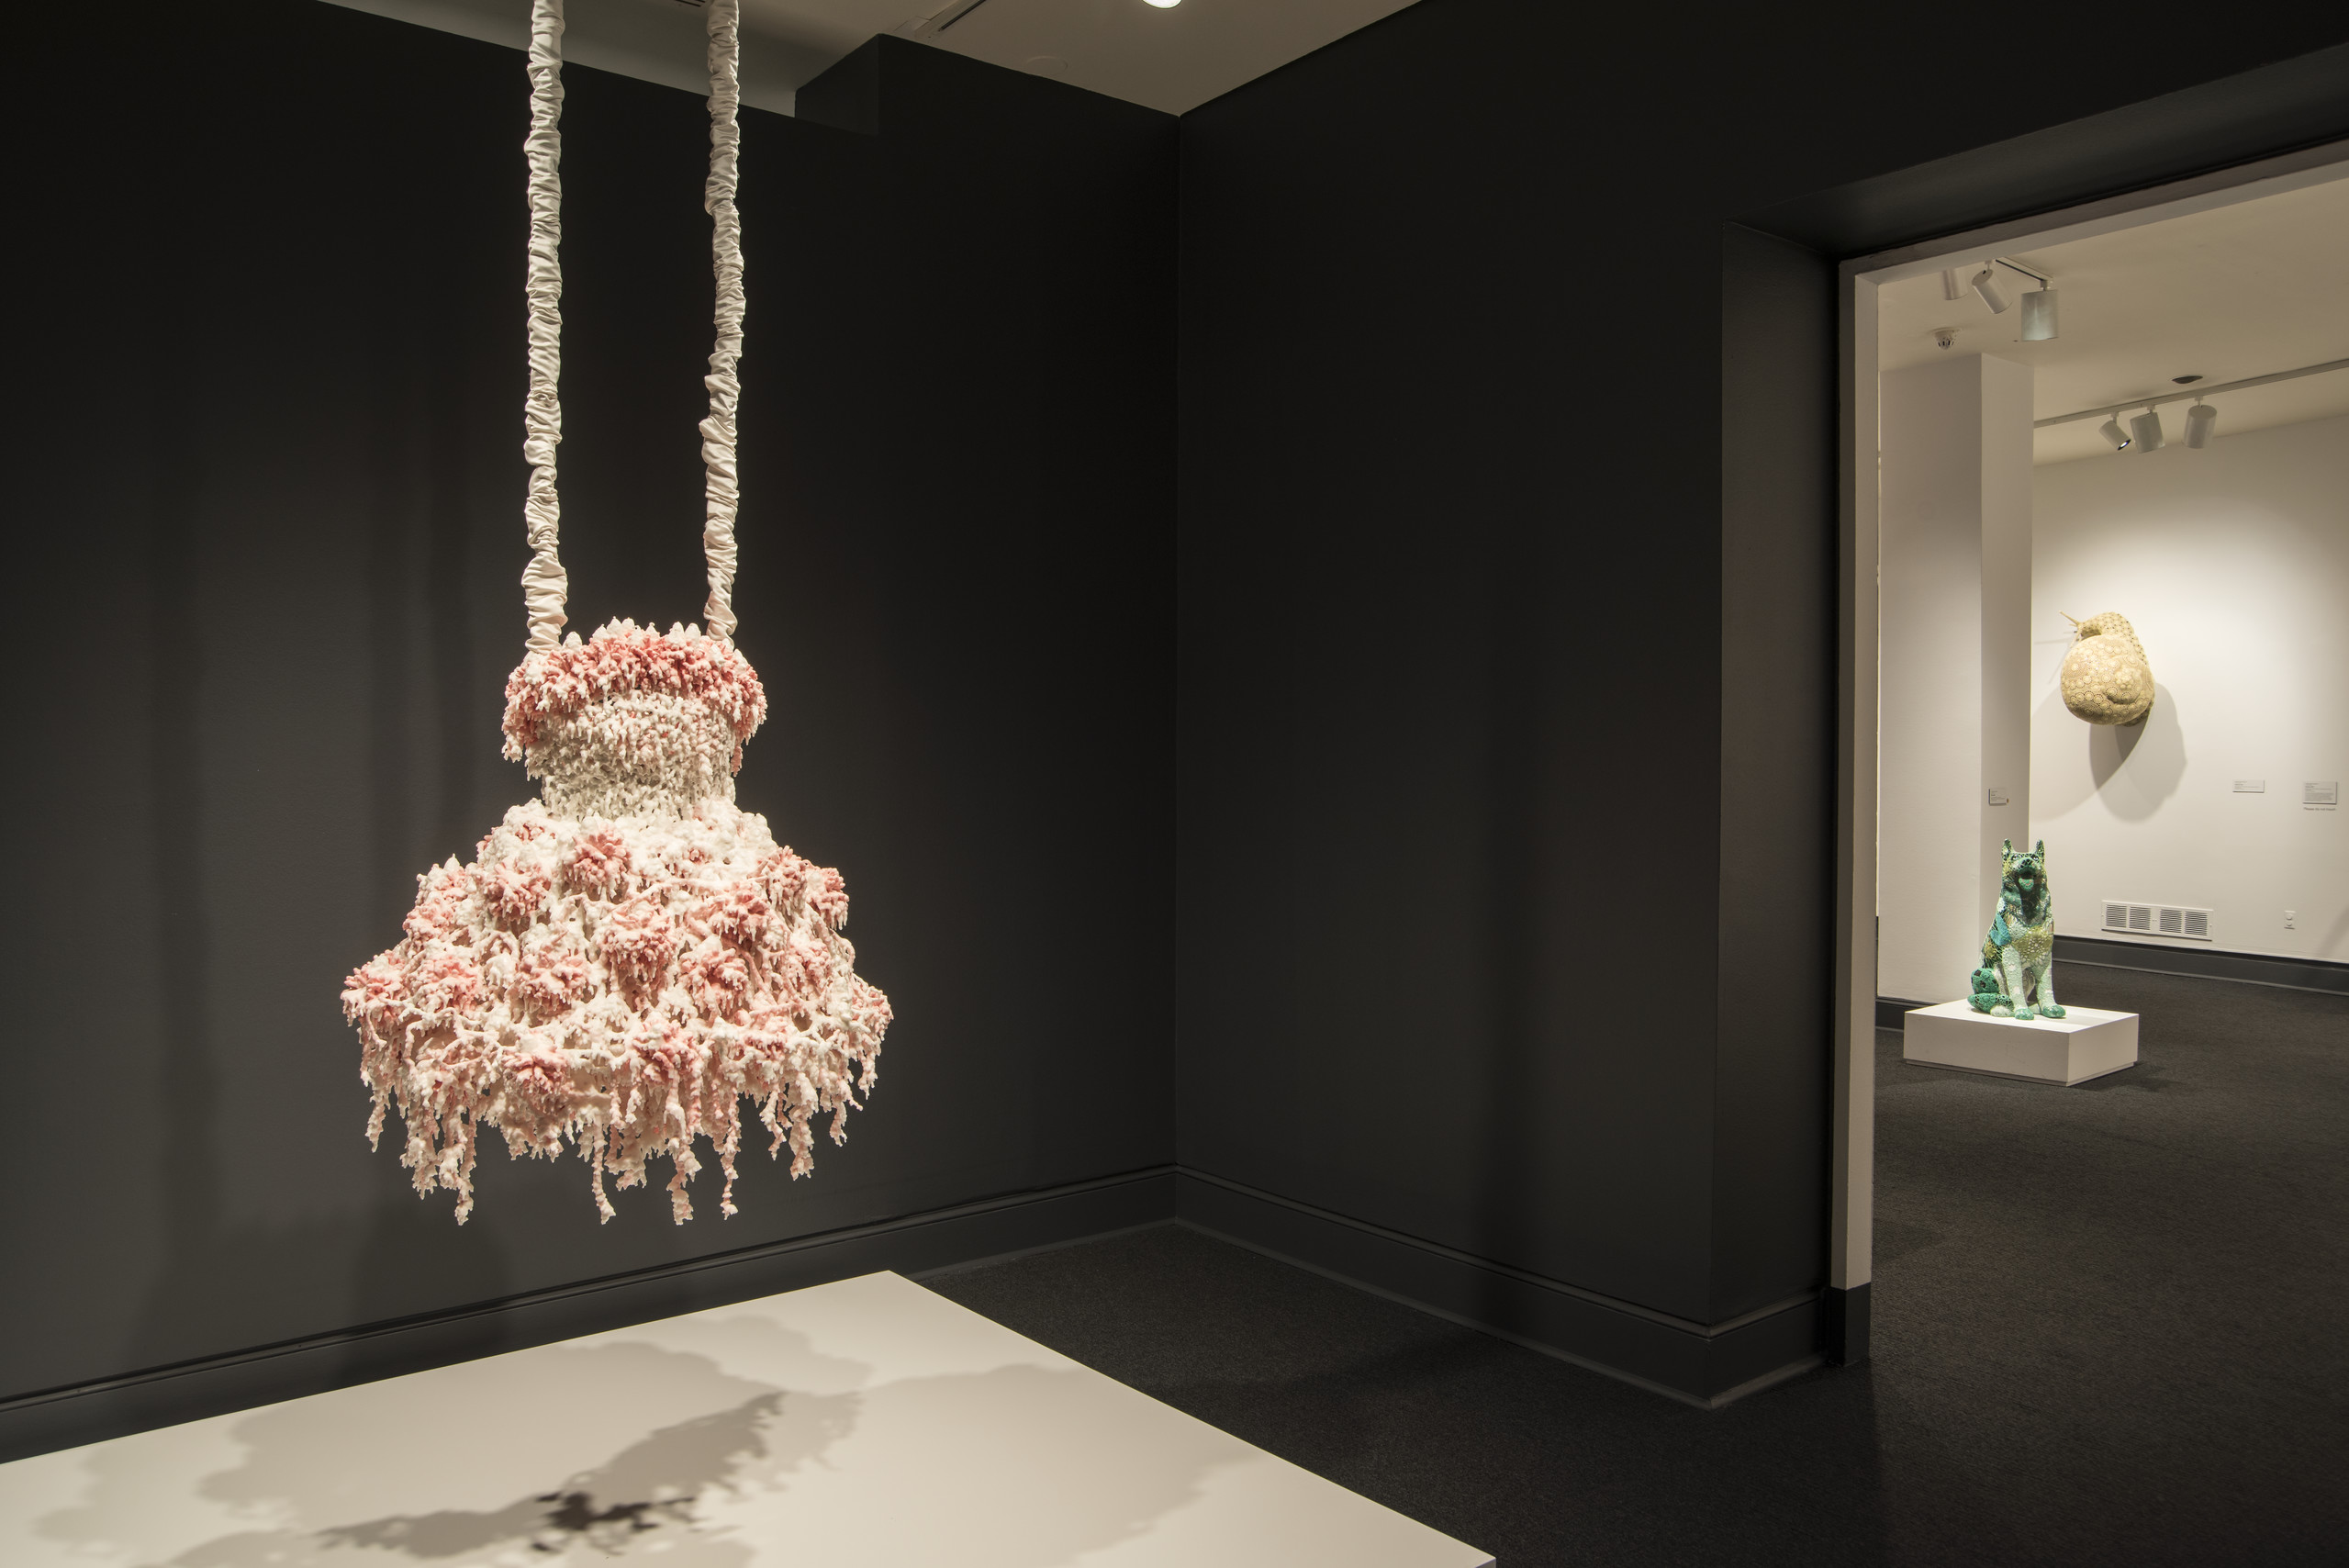 A sculpture hangs in a dark gallery. The sculpture comprises layers of melted pink and white wax that form a dress-like shape hanging from satin-wrapped chains. Its color, shape, and bumpy, lacy texture, evoke a frilly tutu, lavishly frosted wedding cake, or coral.